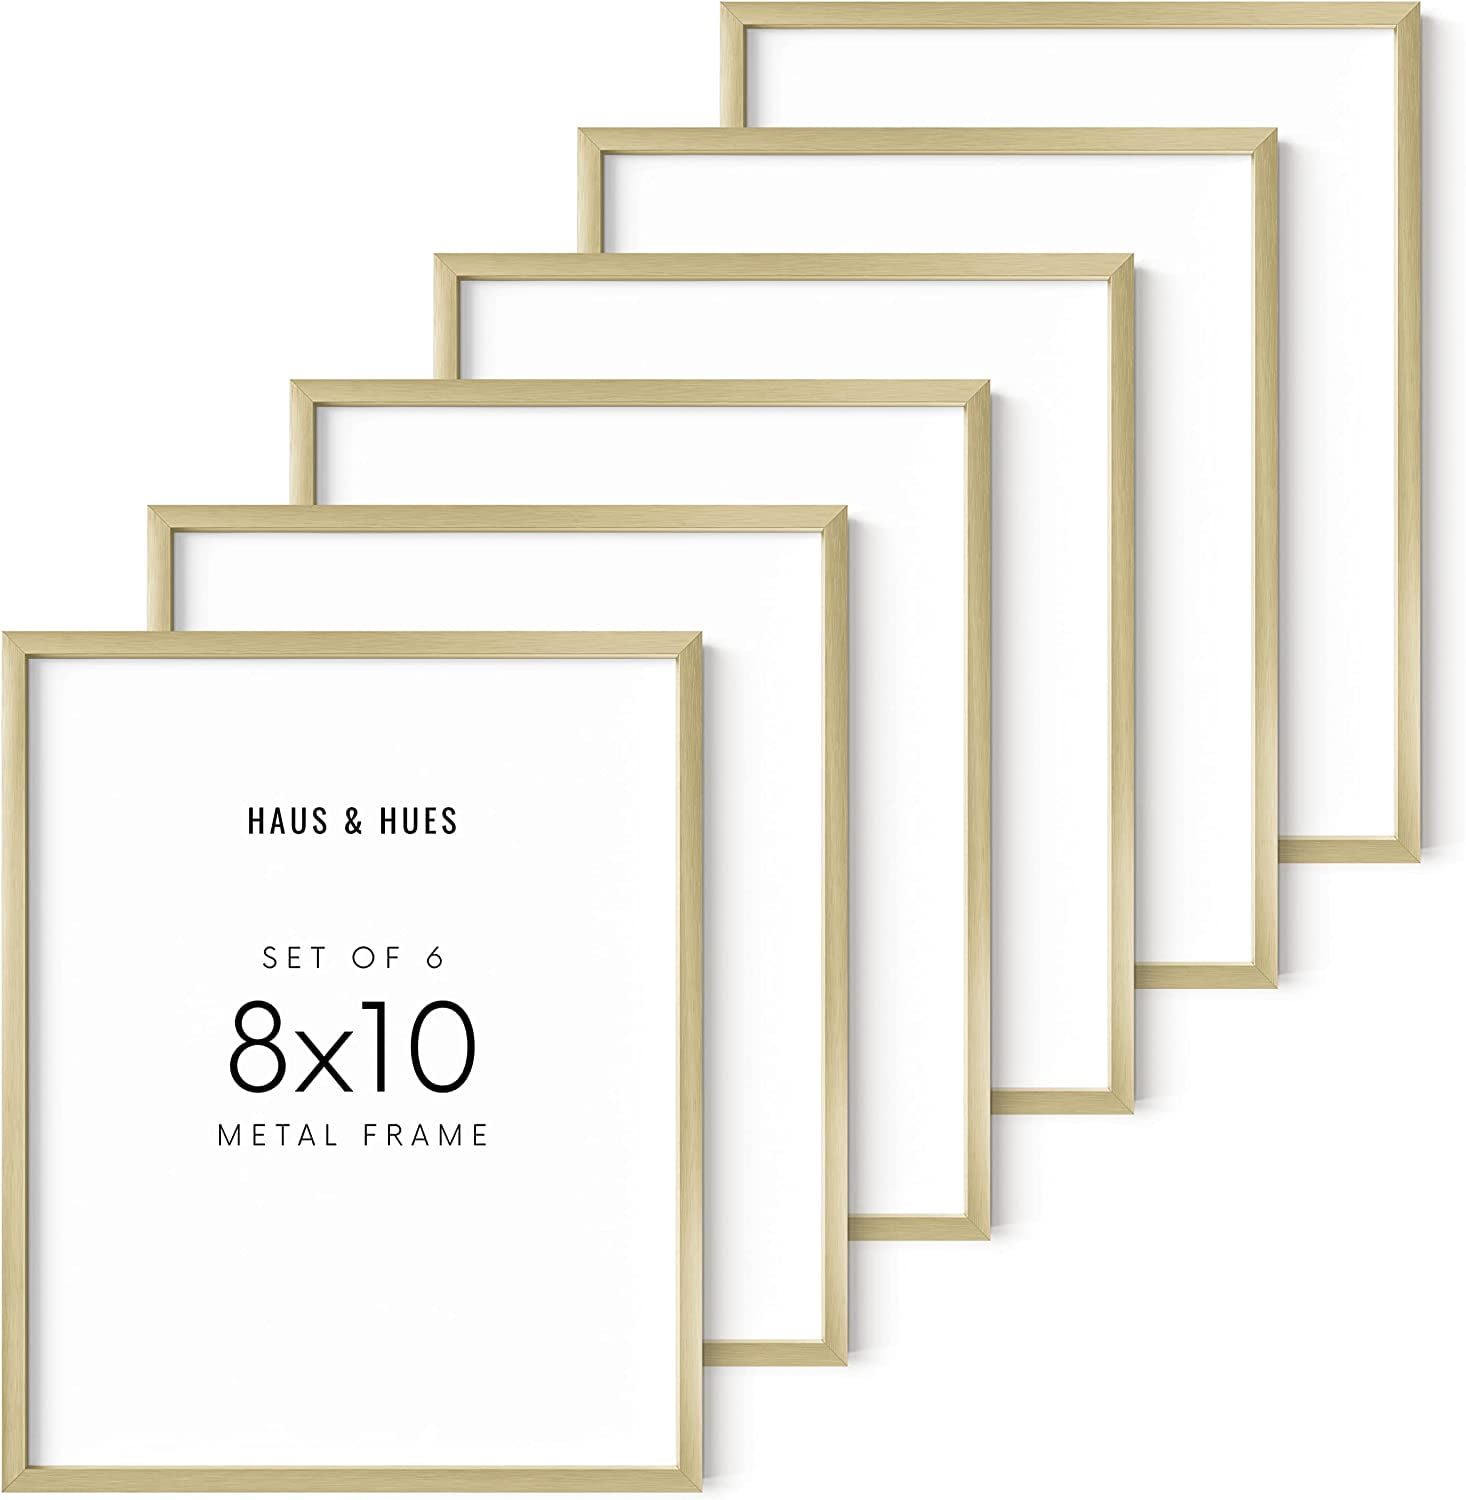  Giftgarden 4x6 Picture Frame Gold Set of 12, Multi Modern 4 x  6 Frames Bulk for Wall or Tabletop Display